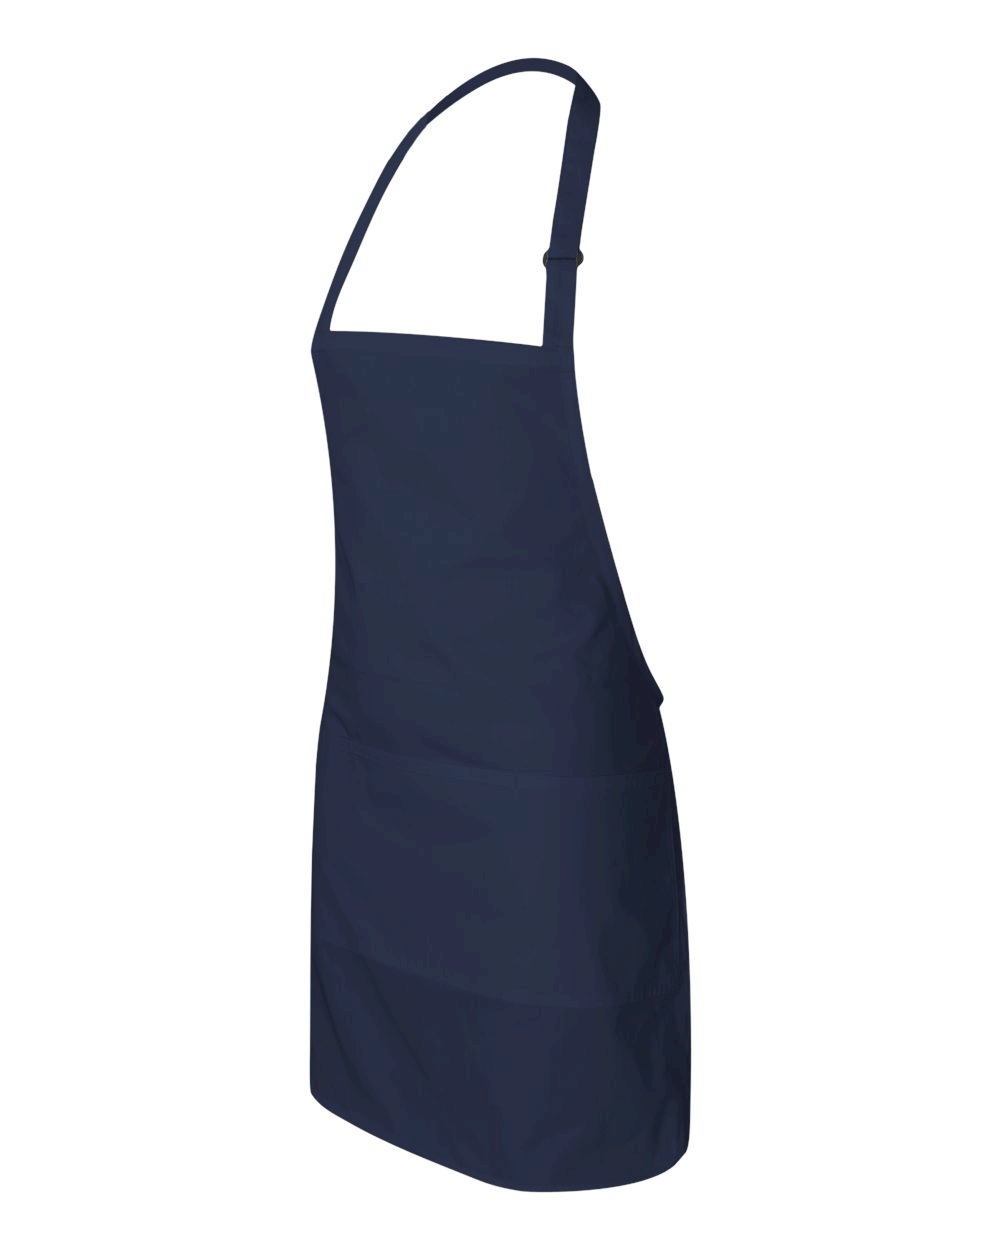 Full Apron Embroidery Blanks - NANTUCKET NAVY